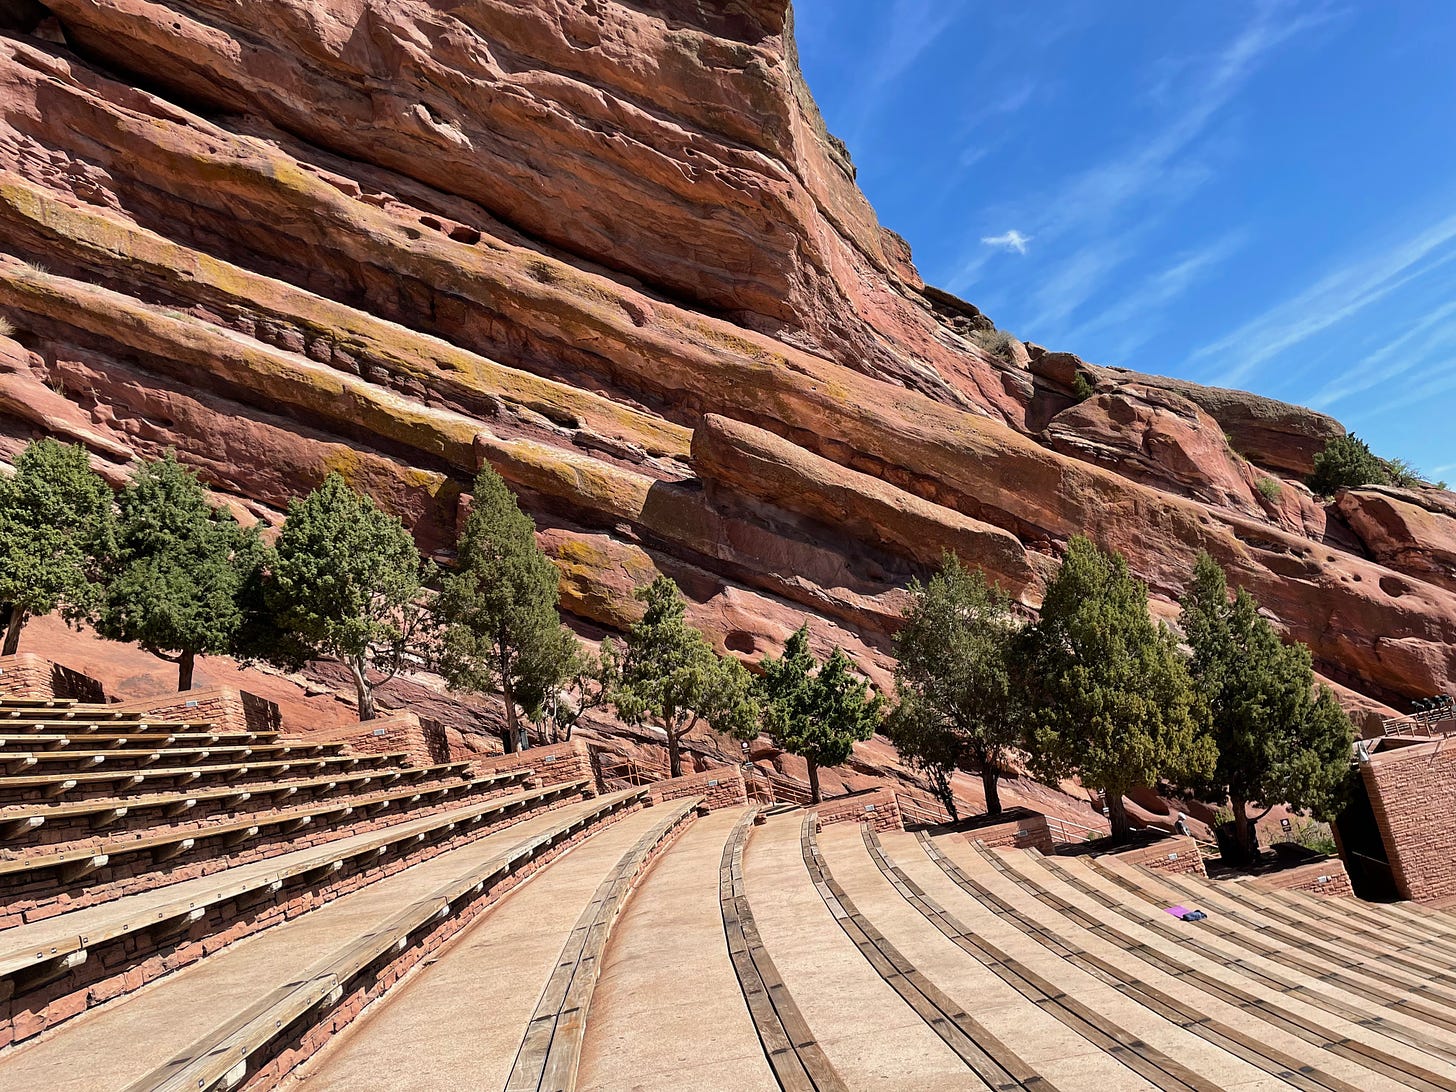 The view of the Red Rocks surrounding the amphitheater